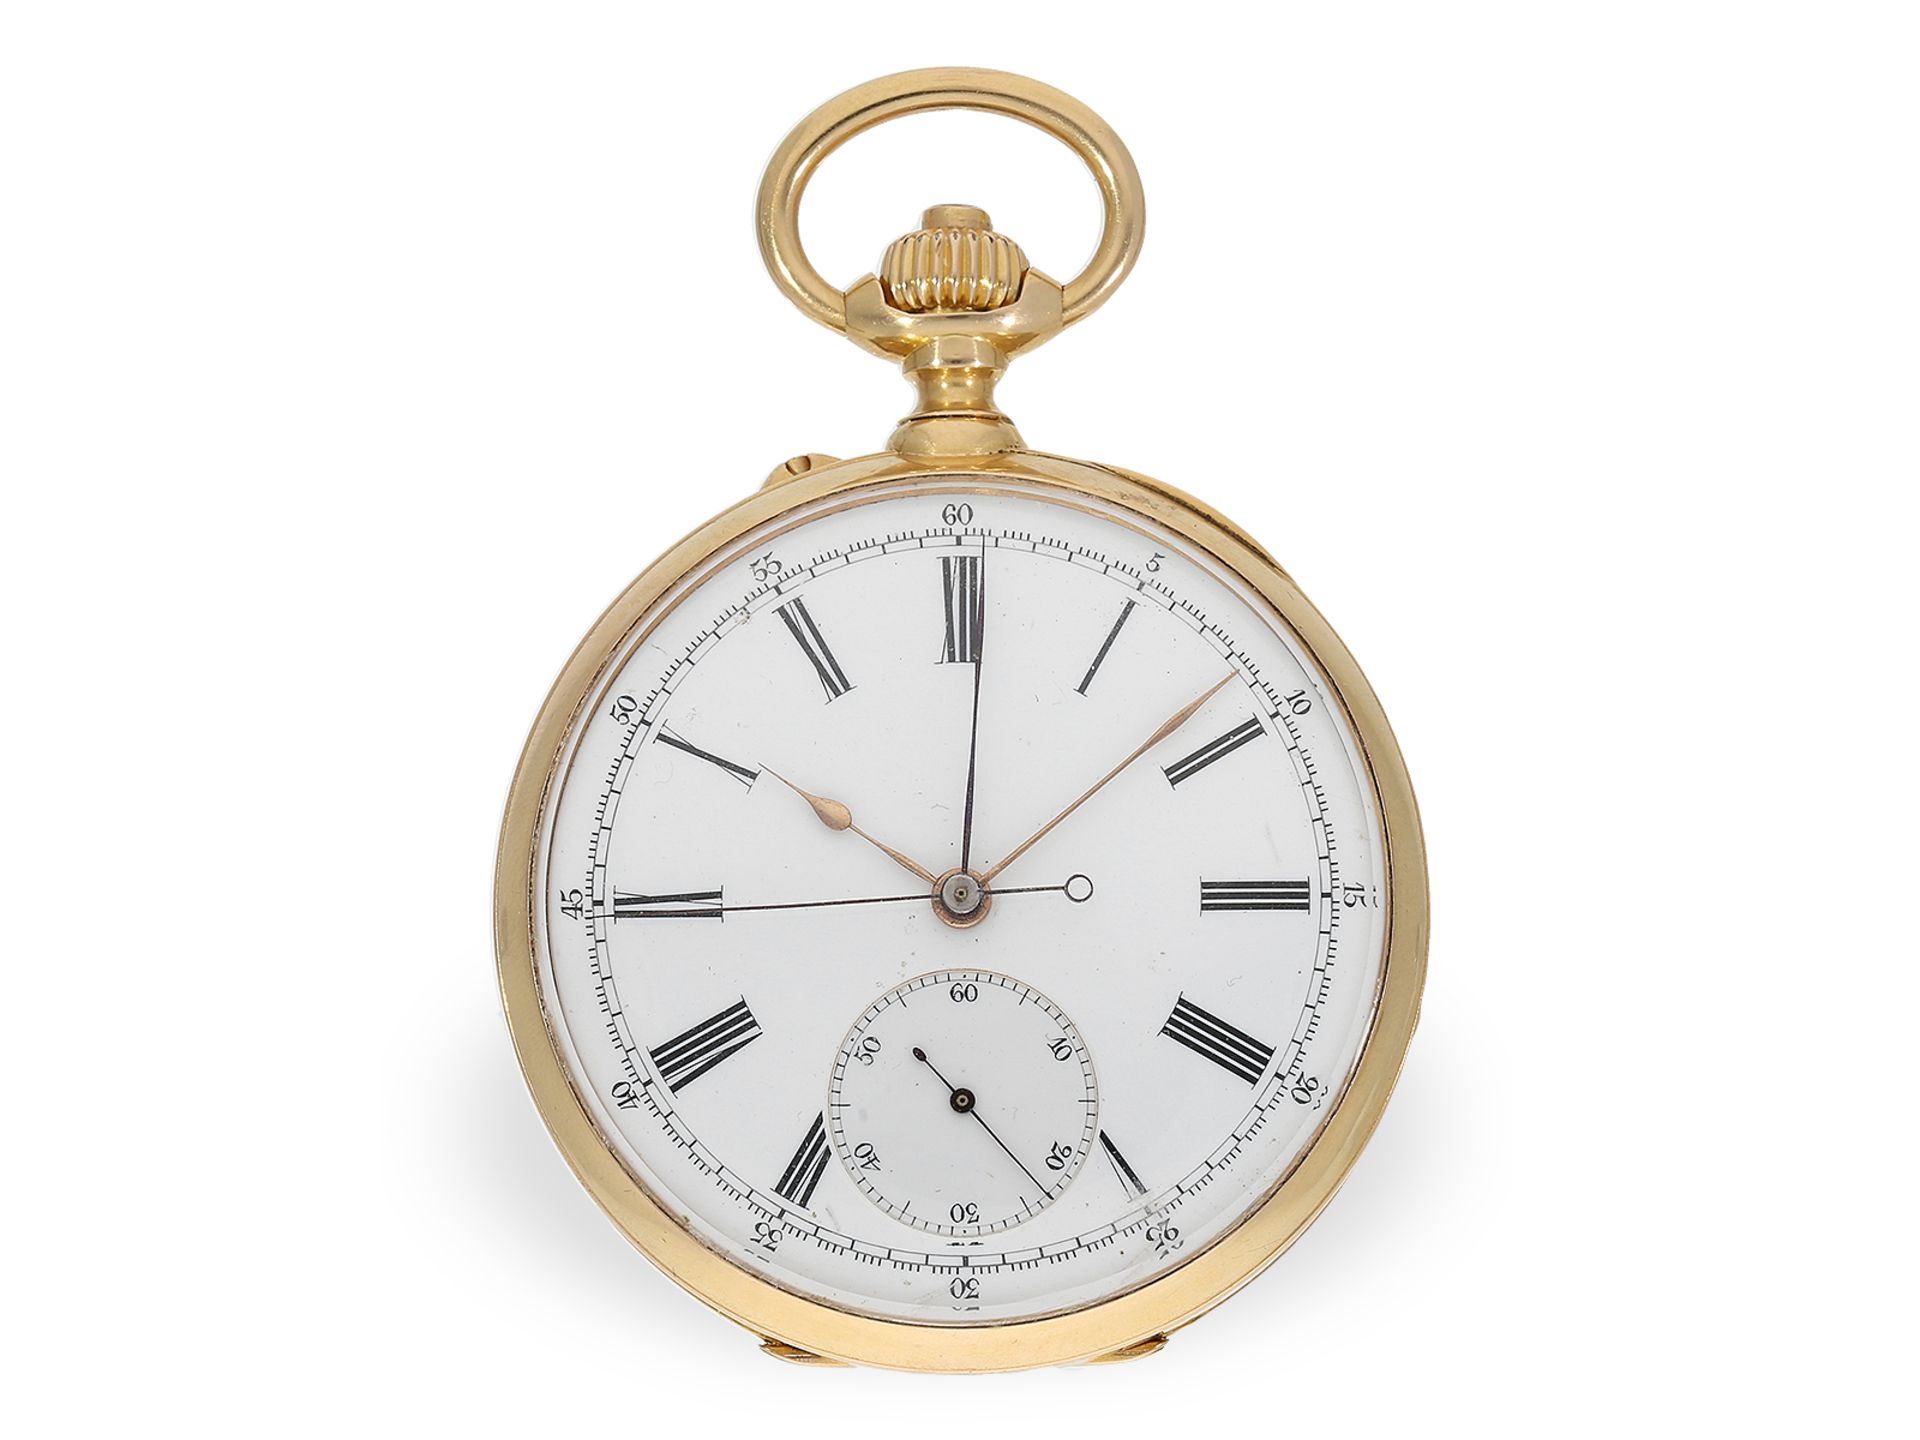 Pocket watch: important Le Roy chronometer with chronograph and central counter, No.57137-3601, ca.